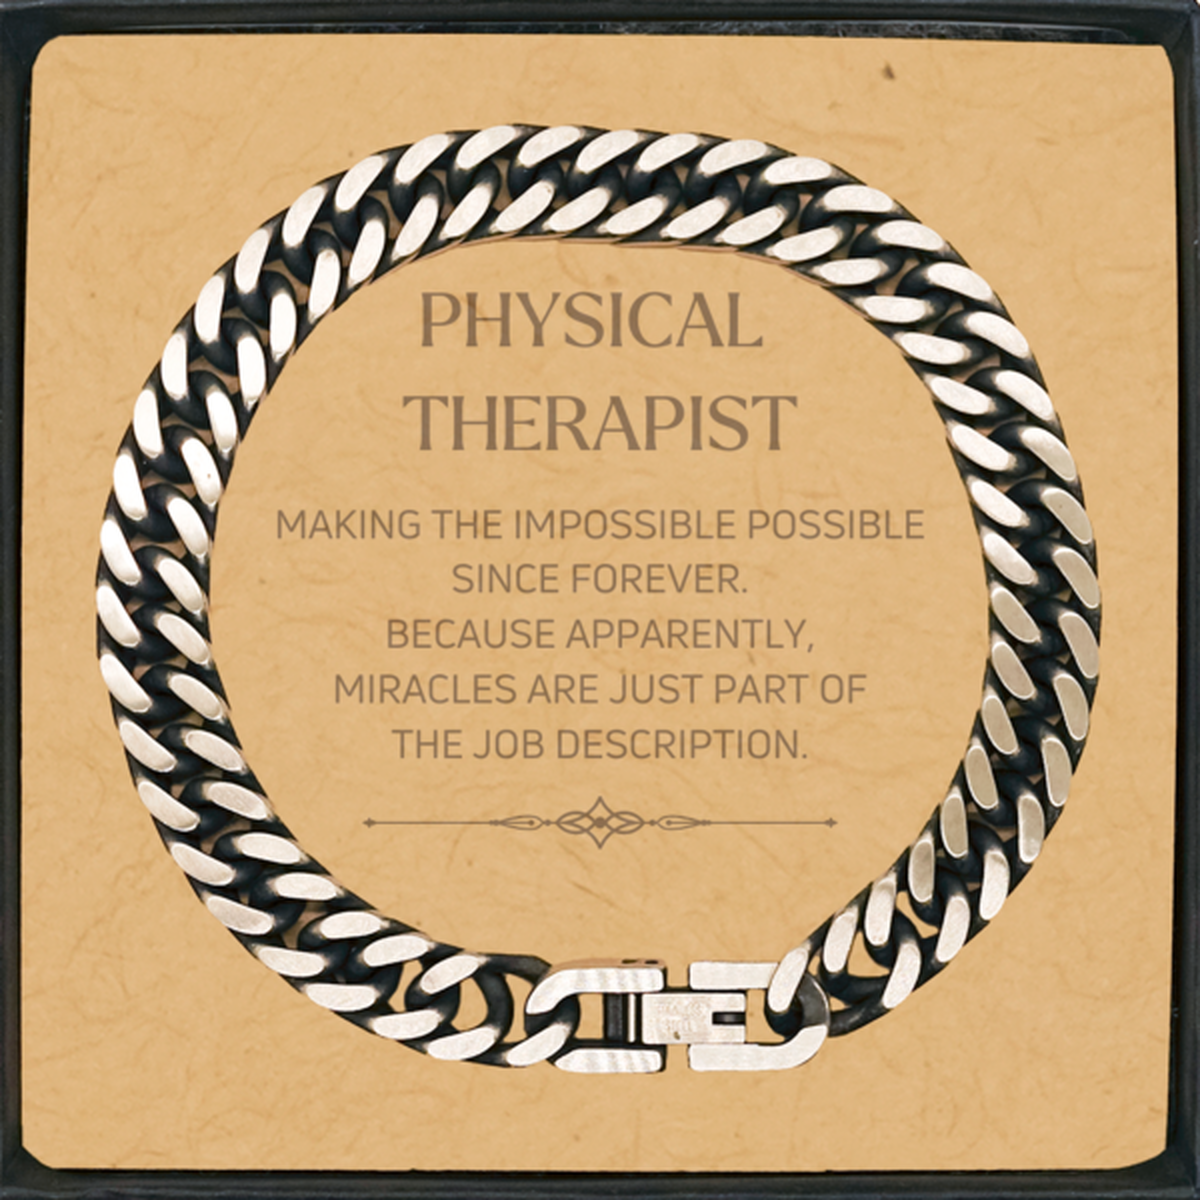 Funny Physical Therapist Gifts, Miracles are just part of the job description, Inspirational Birthday Cuban Link Chain Bracelet For Physical Therapist, Men, Women, Coworkers, Friends, Boss